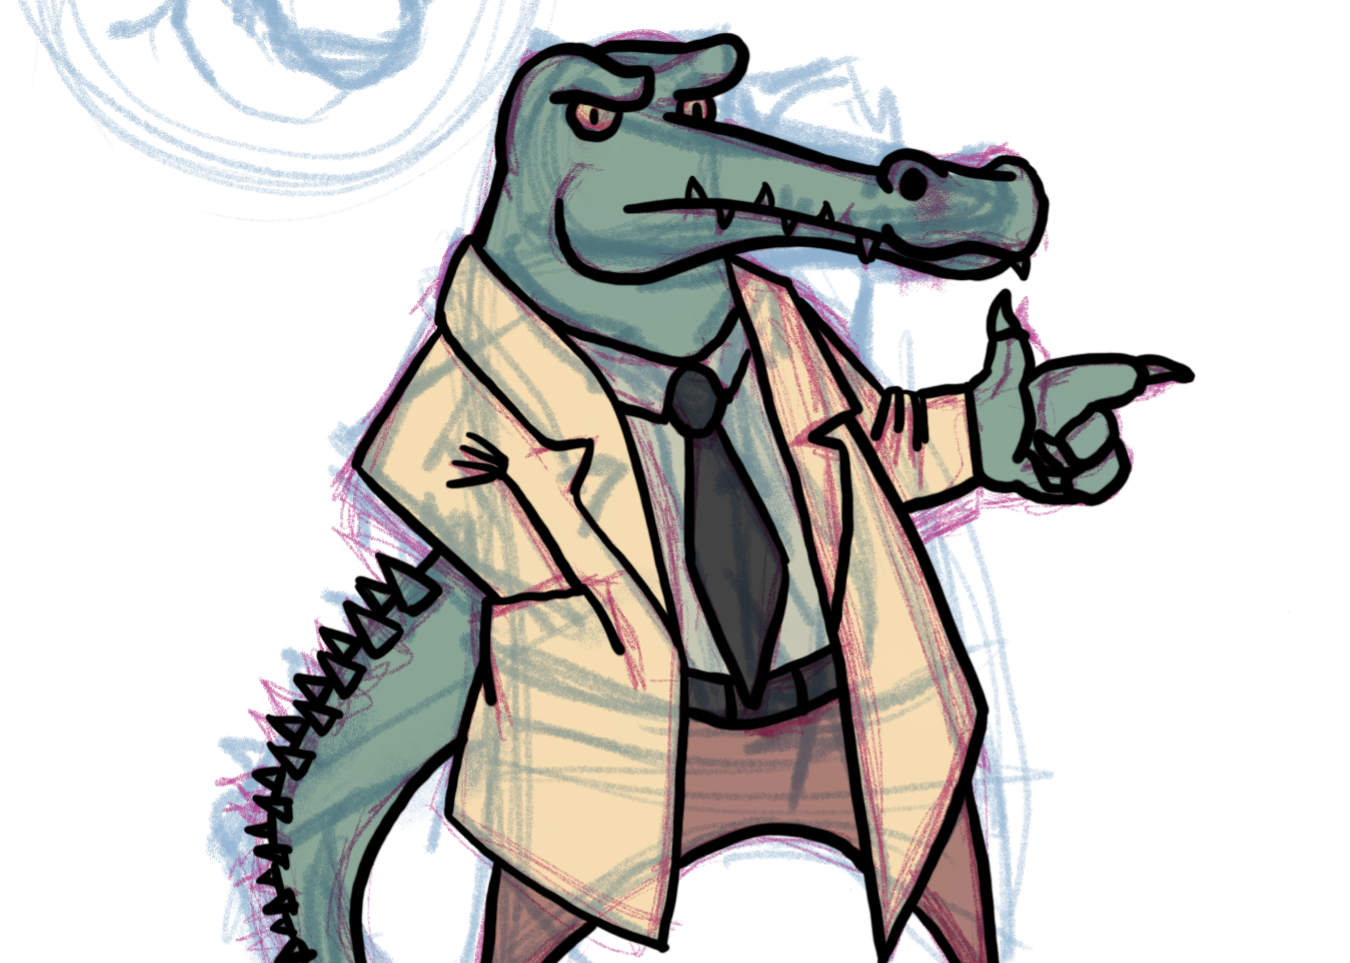 Sketch of a crocodile wearing a Lt. Columbo outfit and giving a thumbs-up